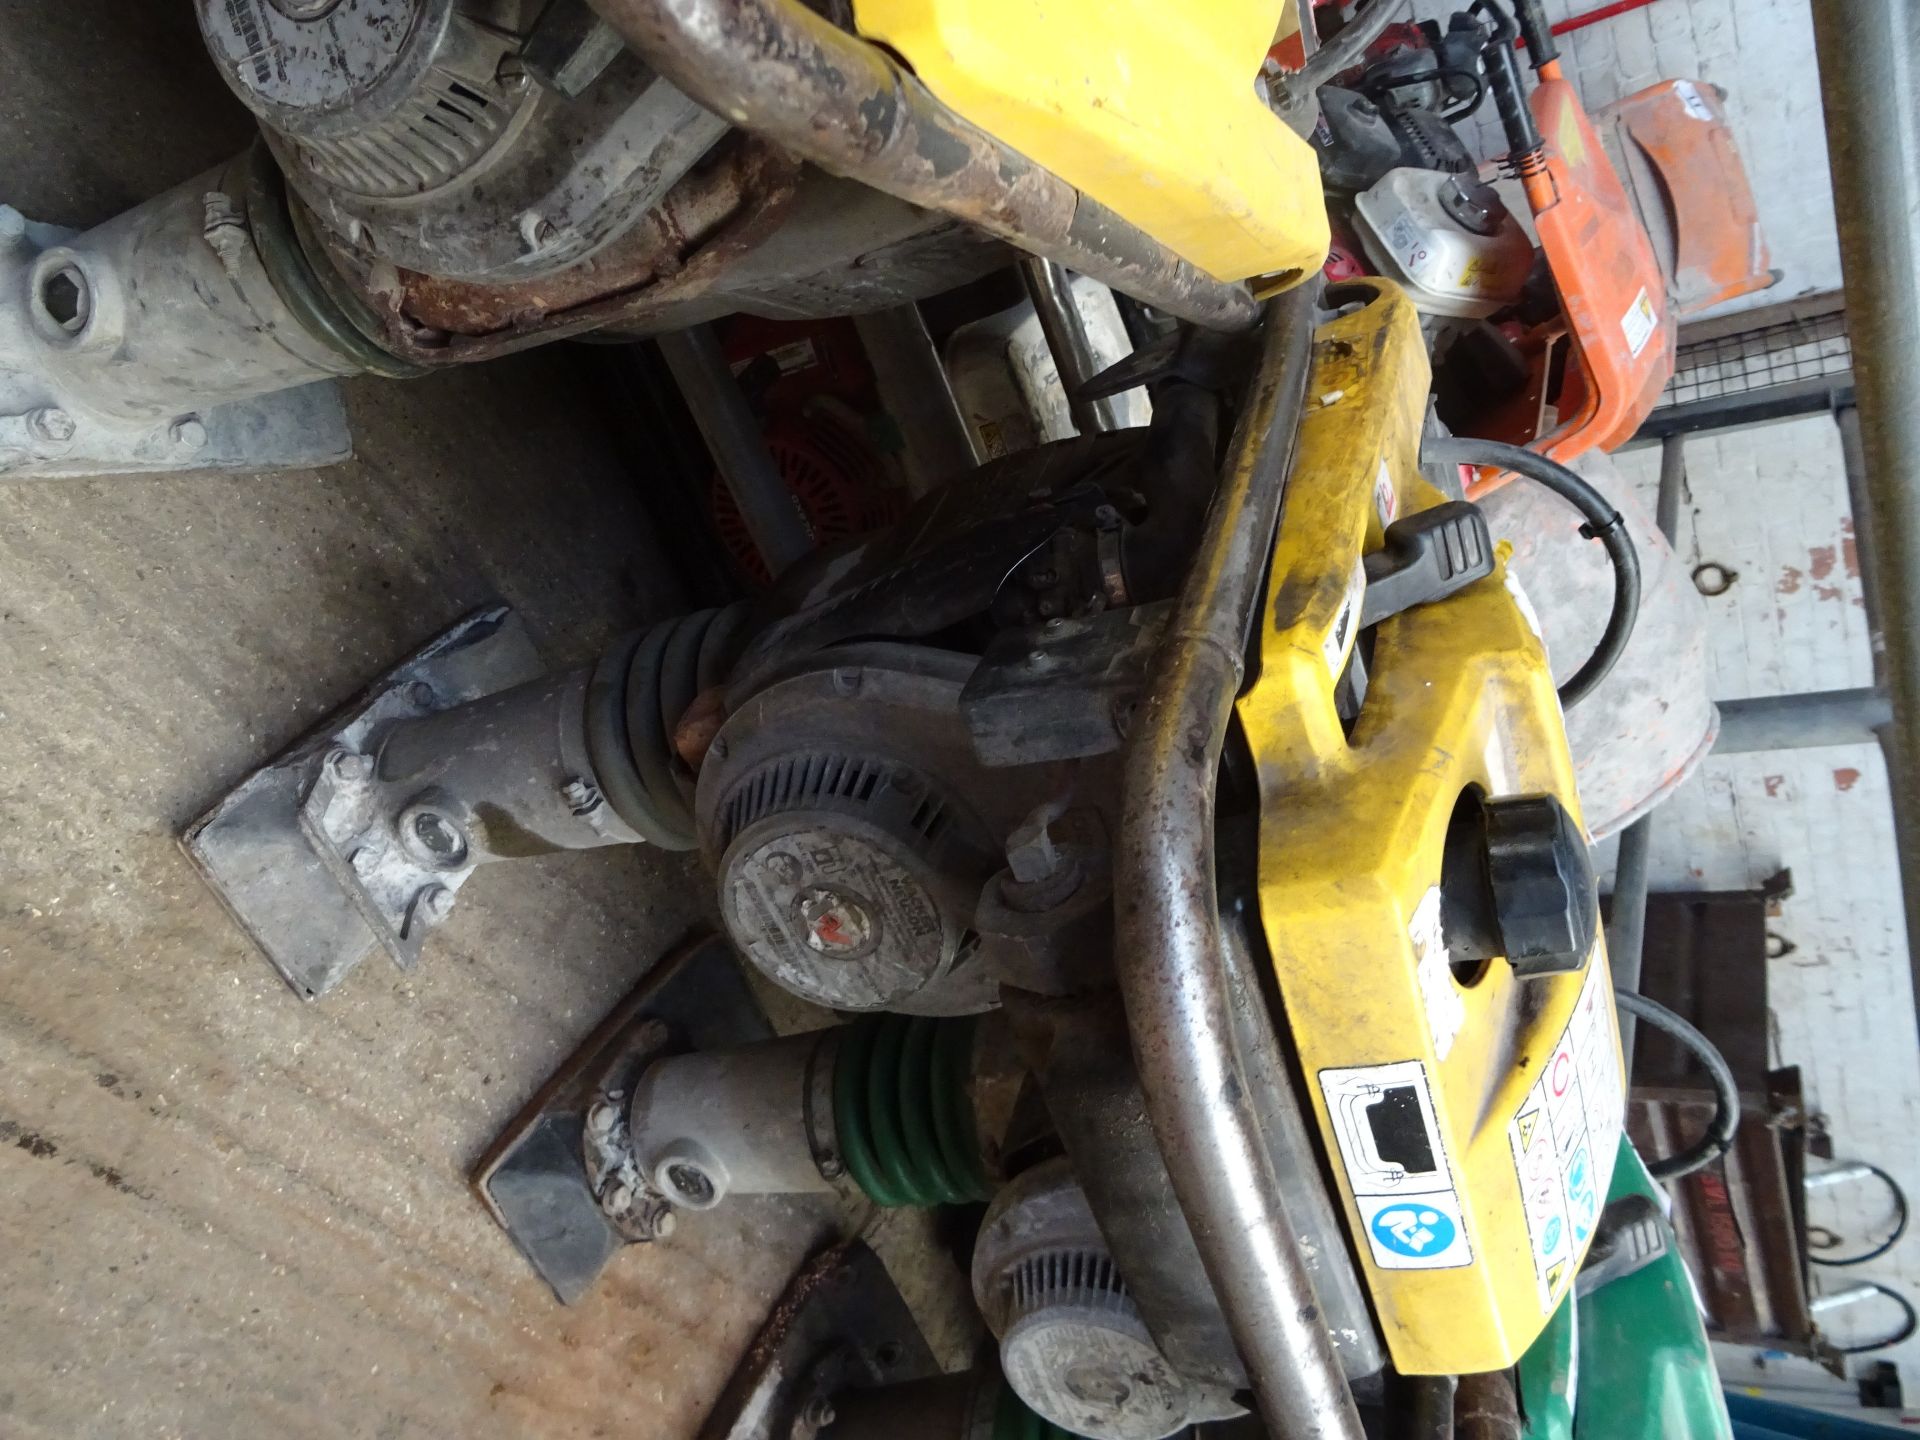 Yellow top upright rammer